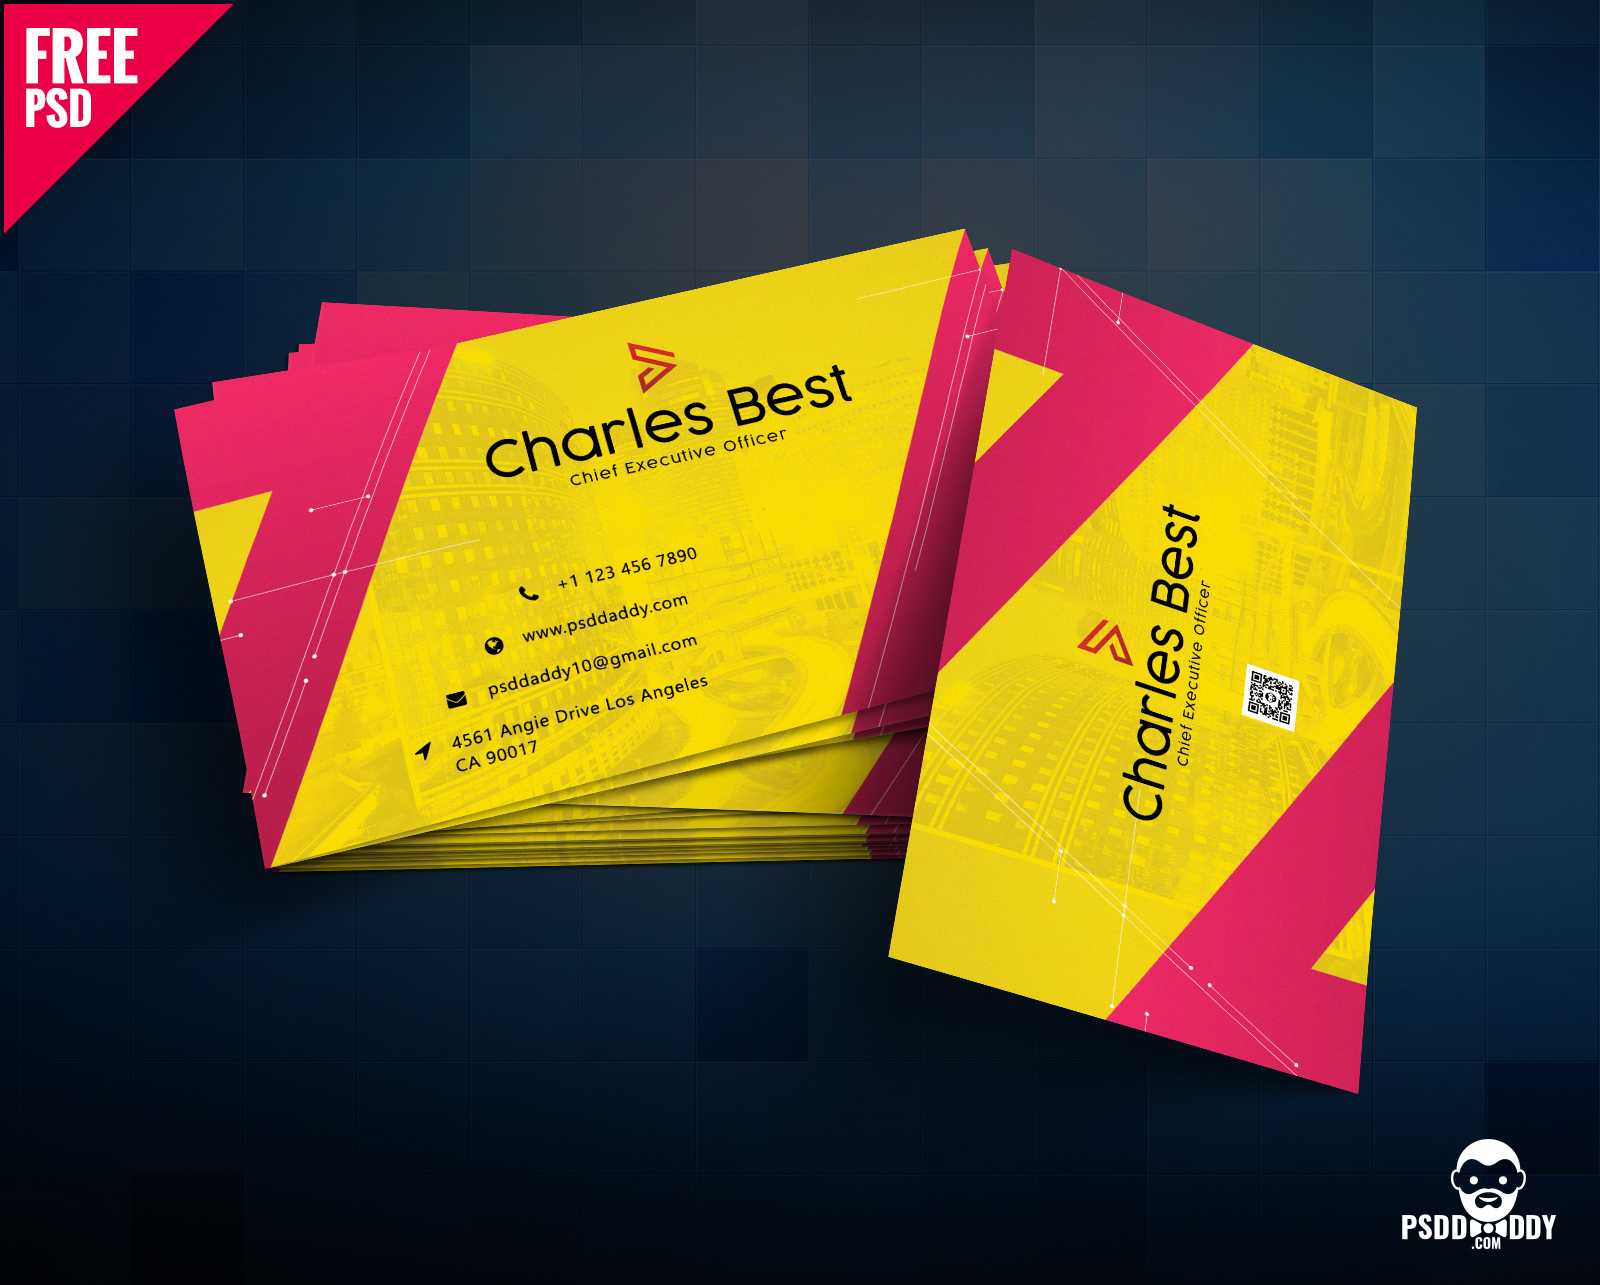 Download] Creative Business Card Free Psd | Psddaddy For Psd Name Card Template